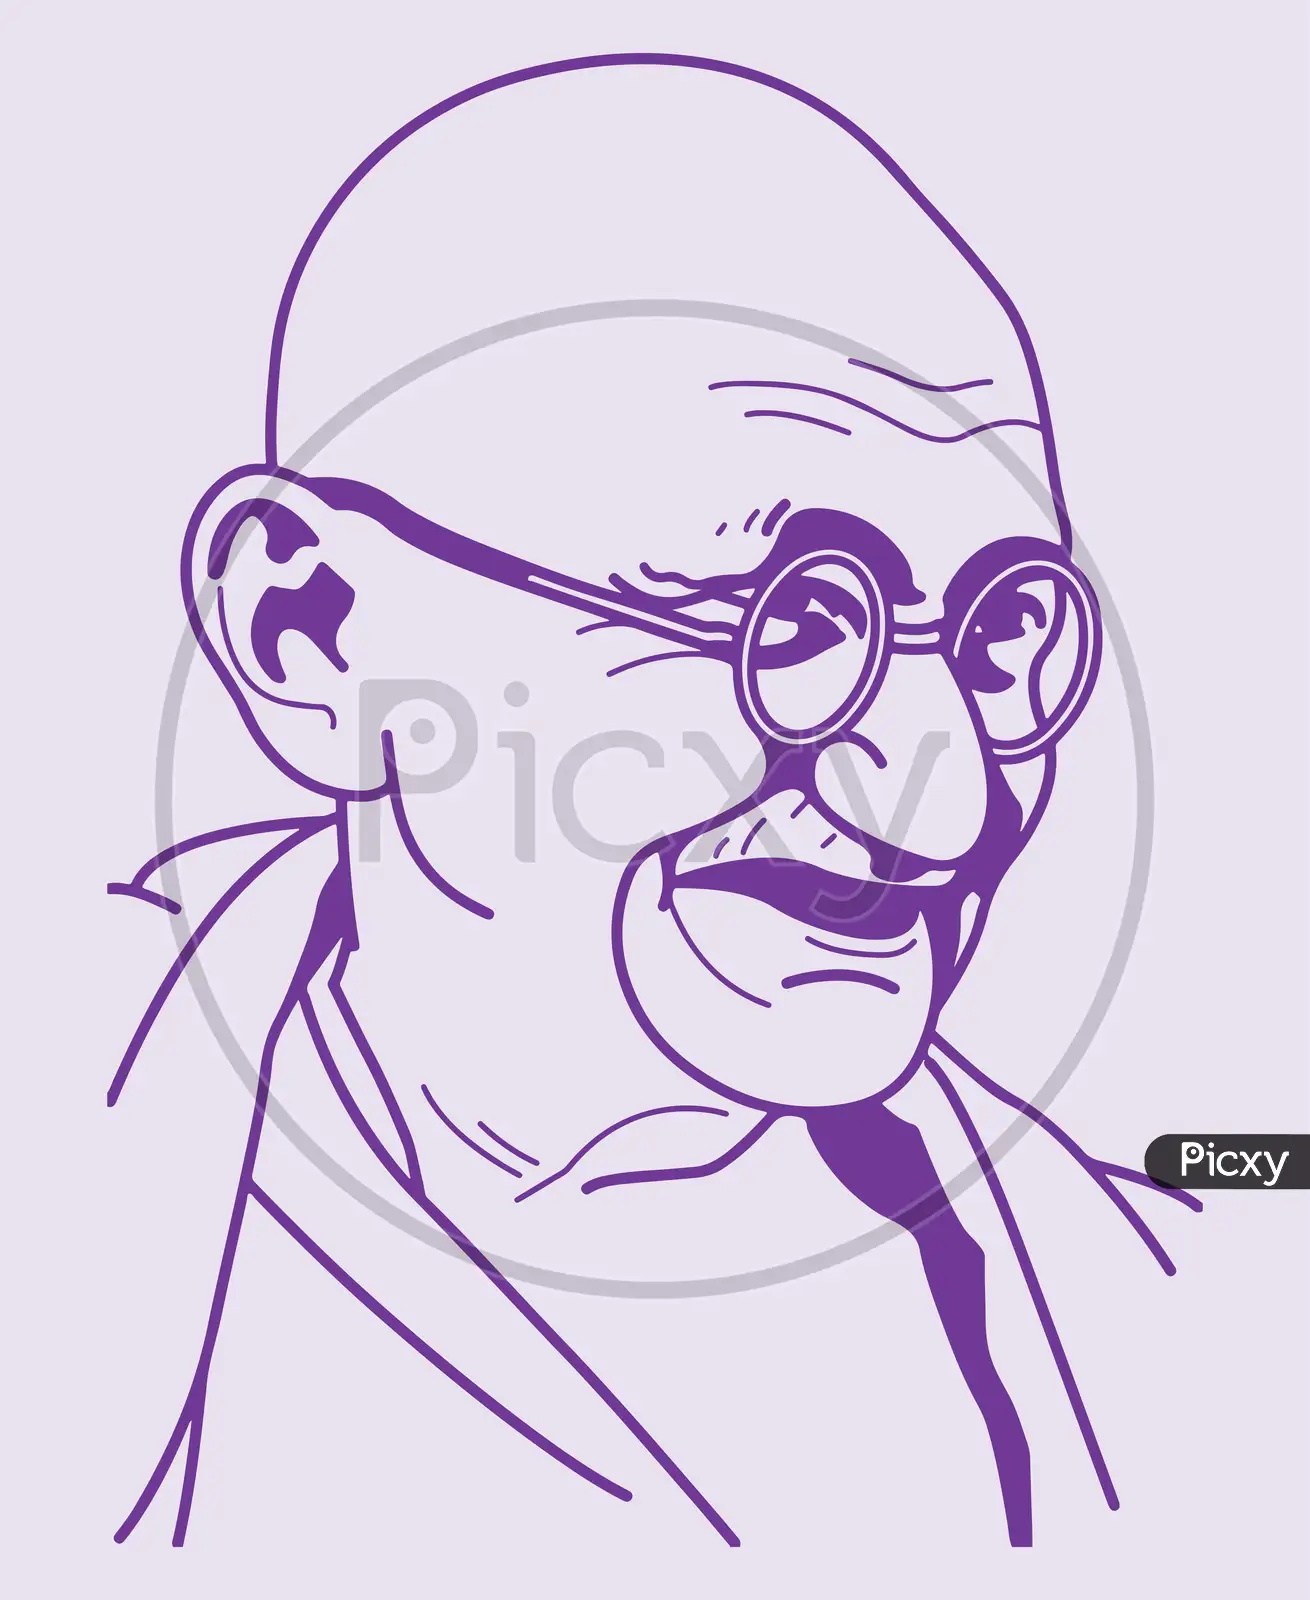 Indian Freedom Fighter Mahatma Gandhi: Over 1,309 Royalty-Free Licensable  Stock Illustrations & Drawings | Shutterstock